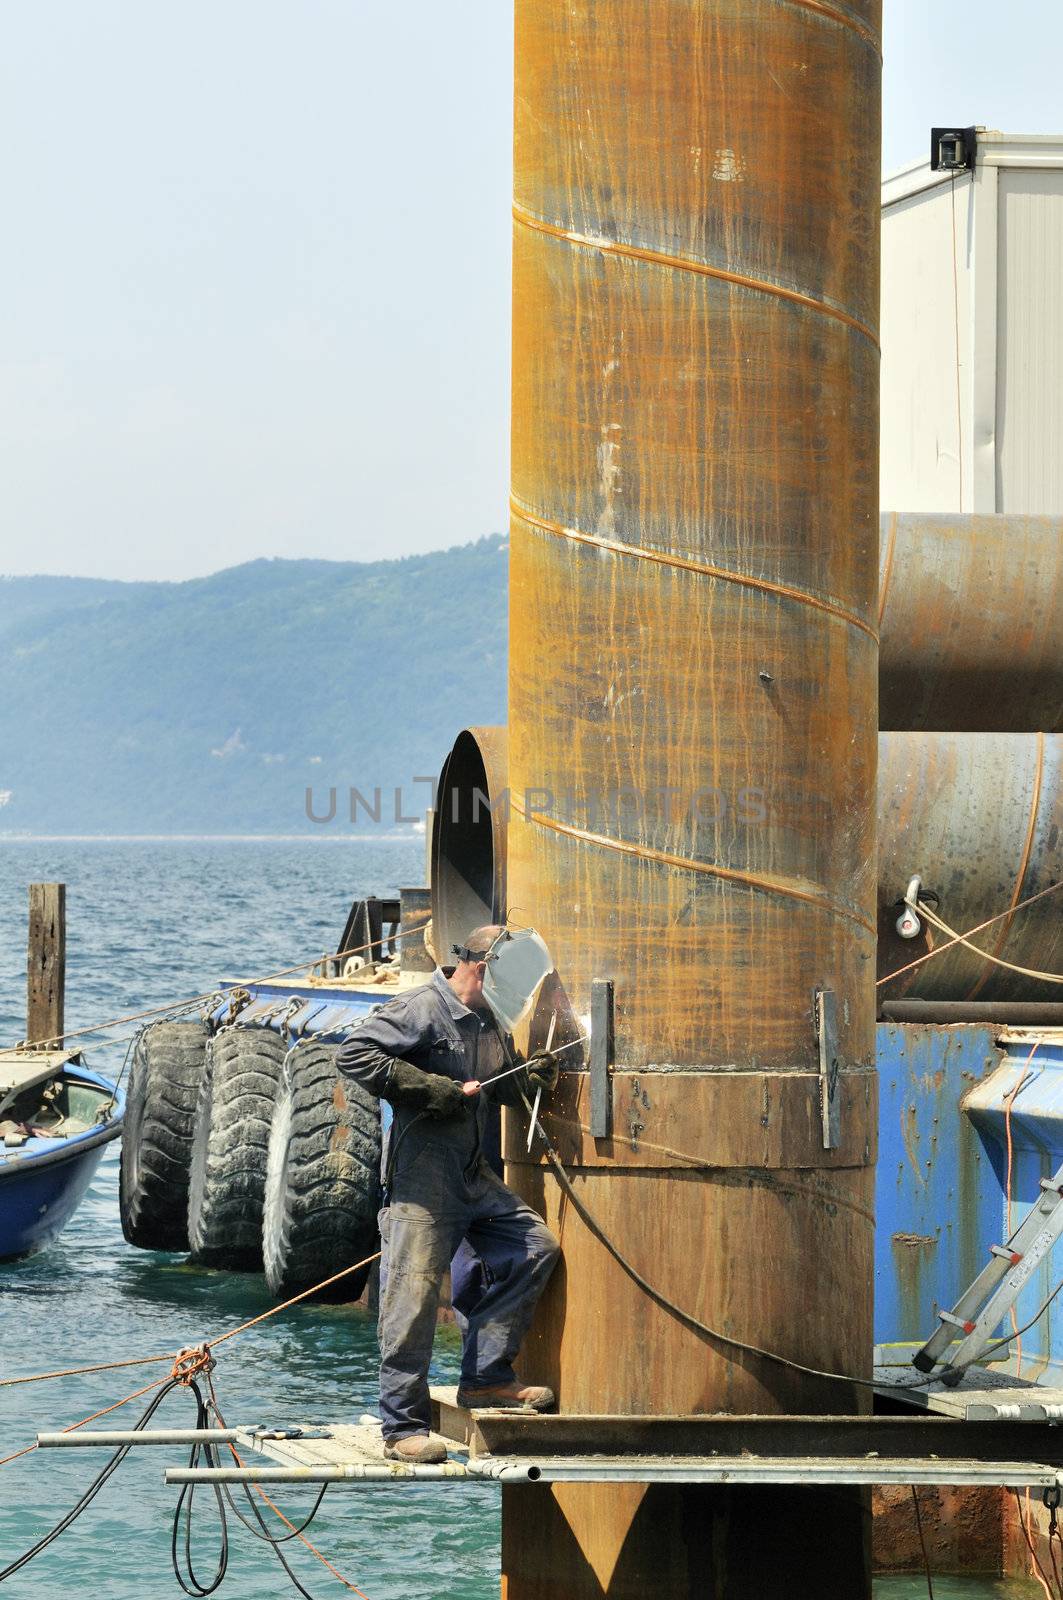 Workman using weld in a harbour